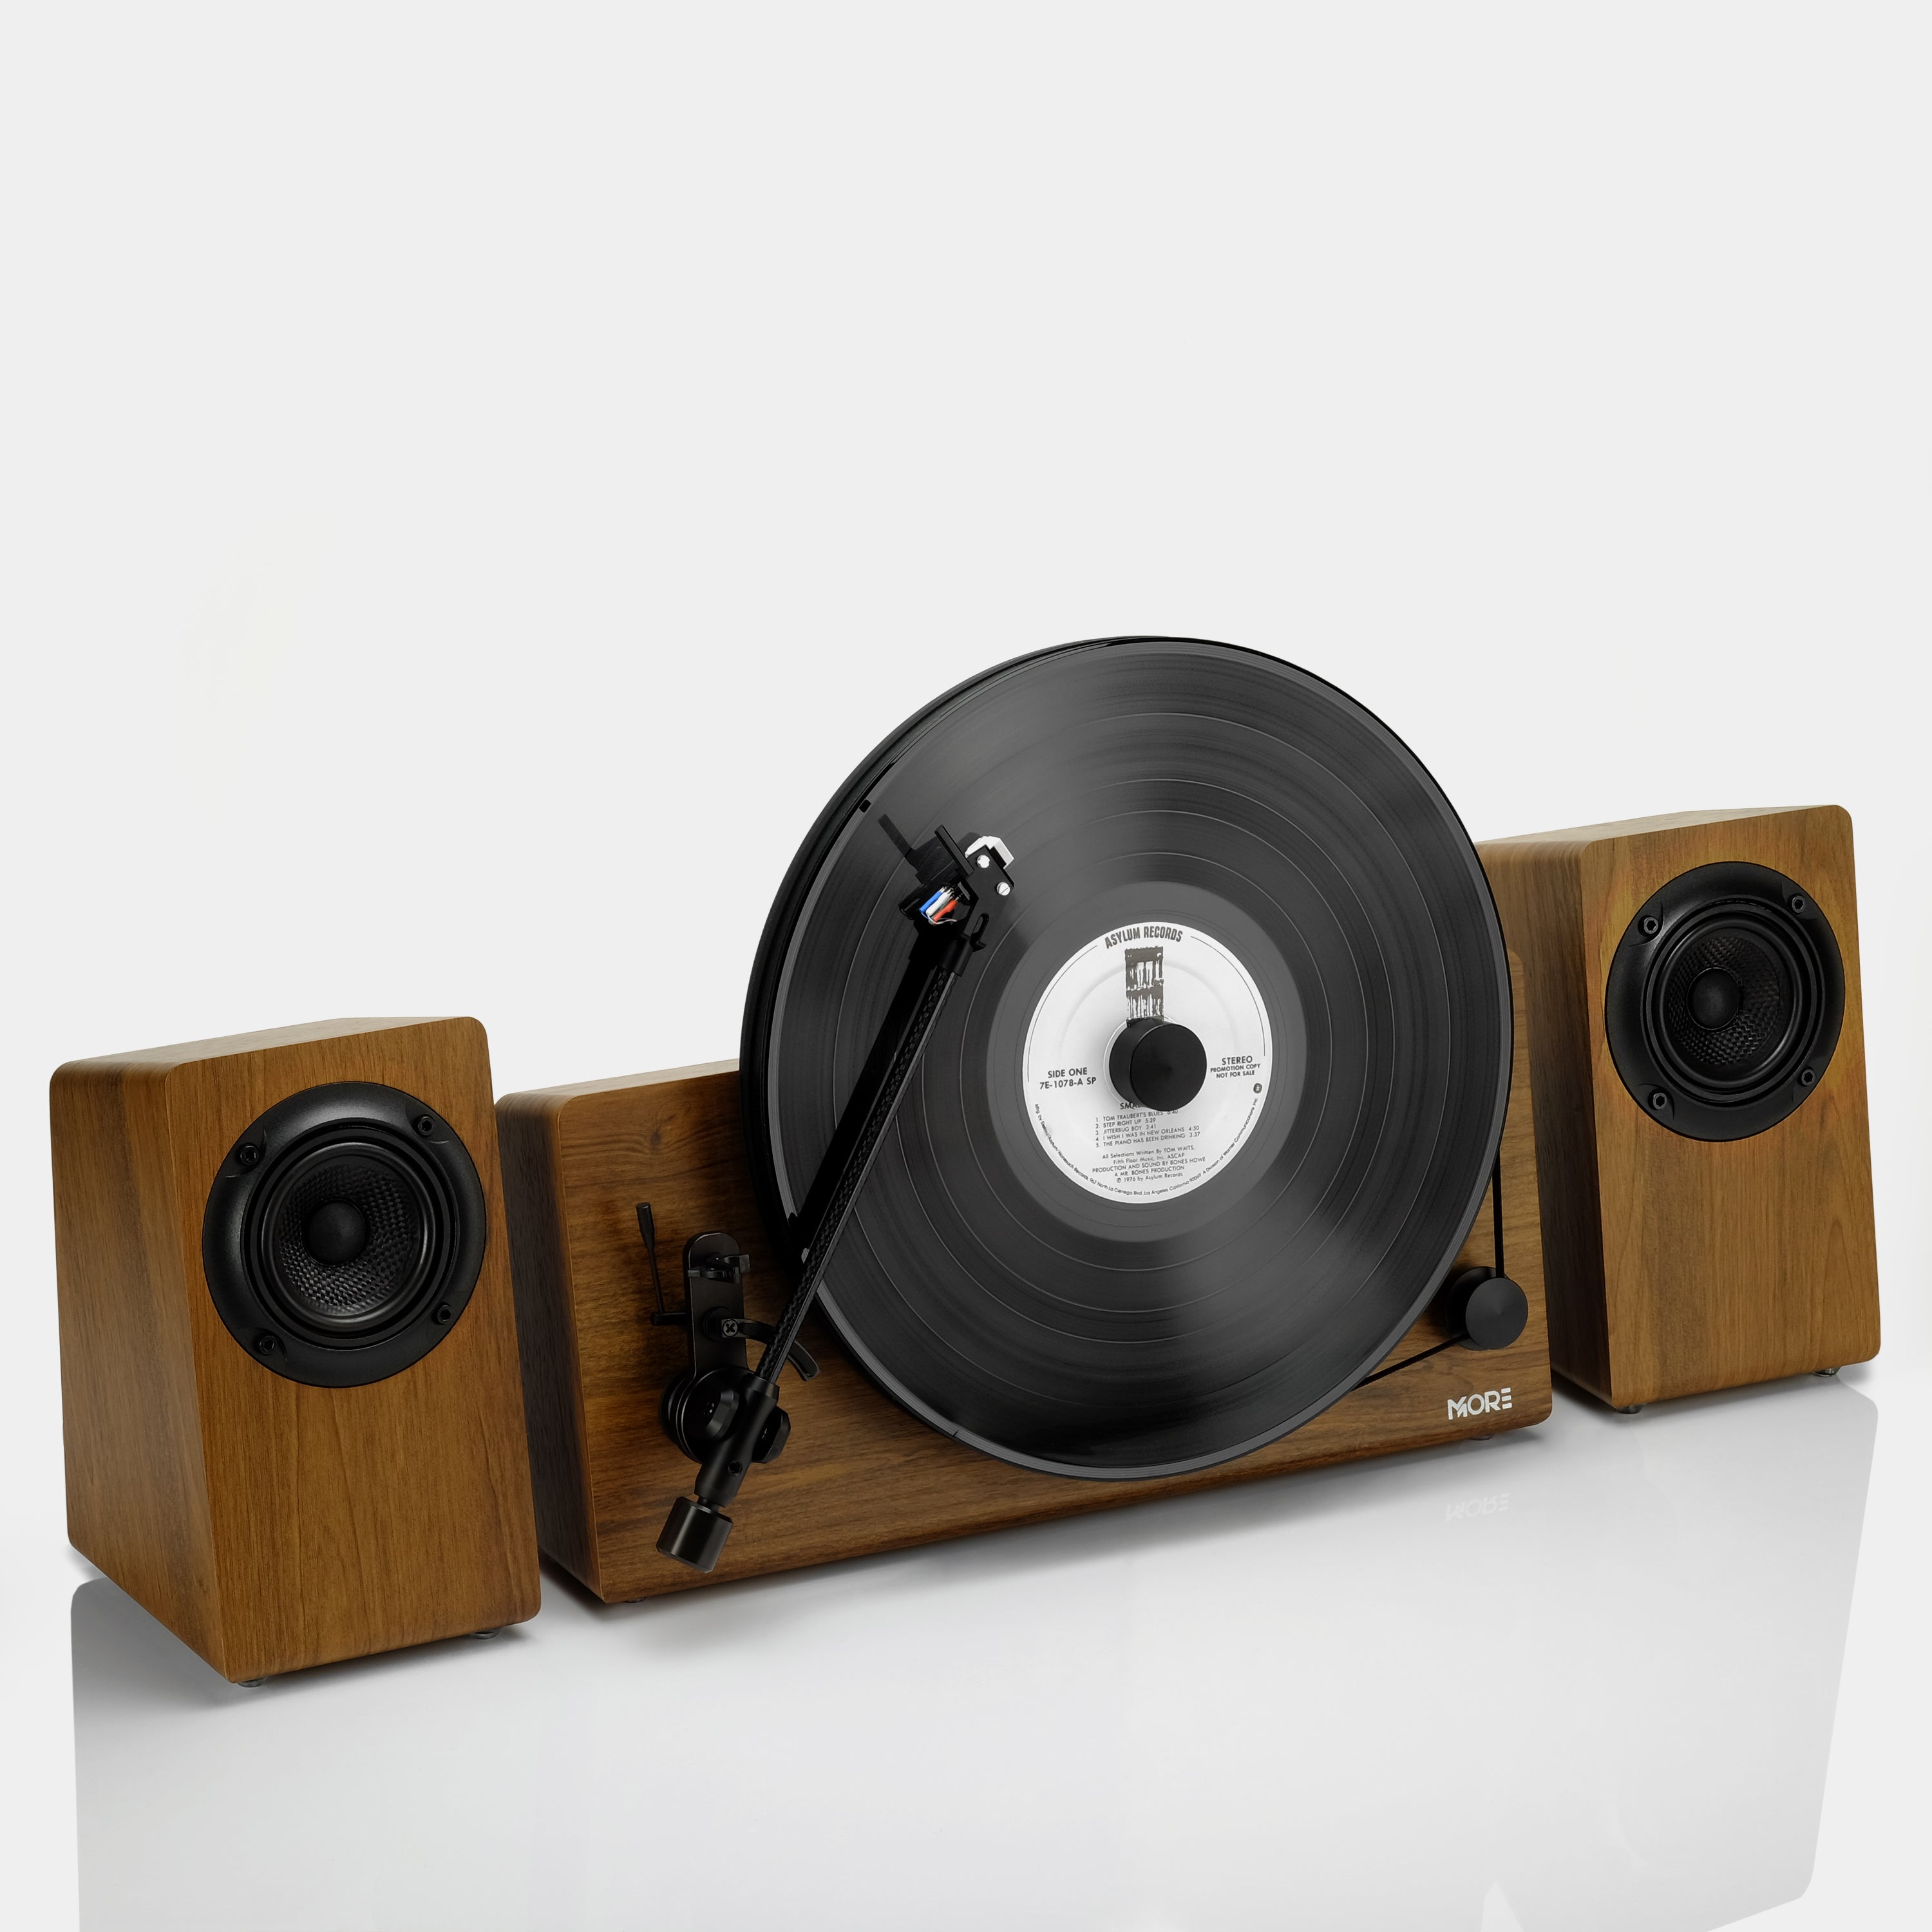 MORE Vertical Play Station Walnut Turntable